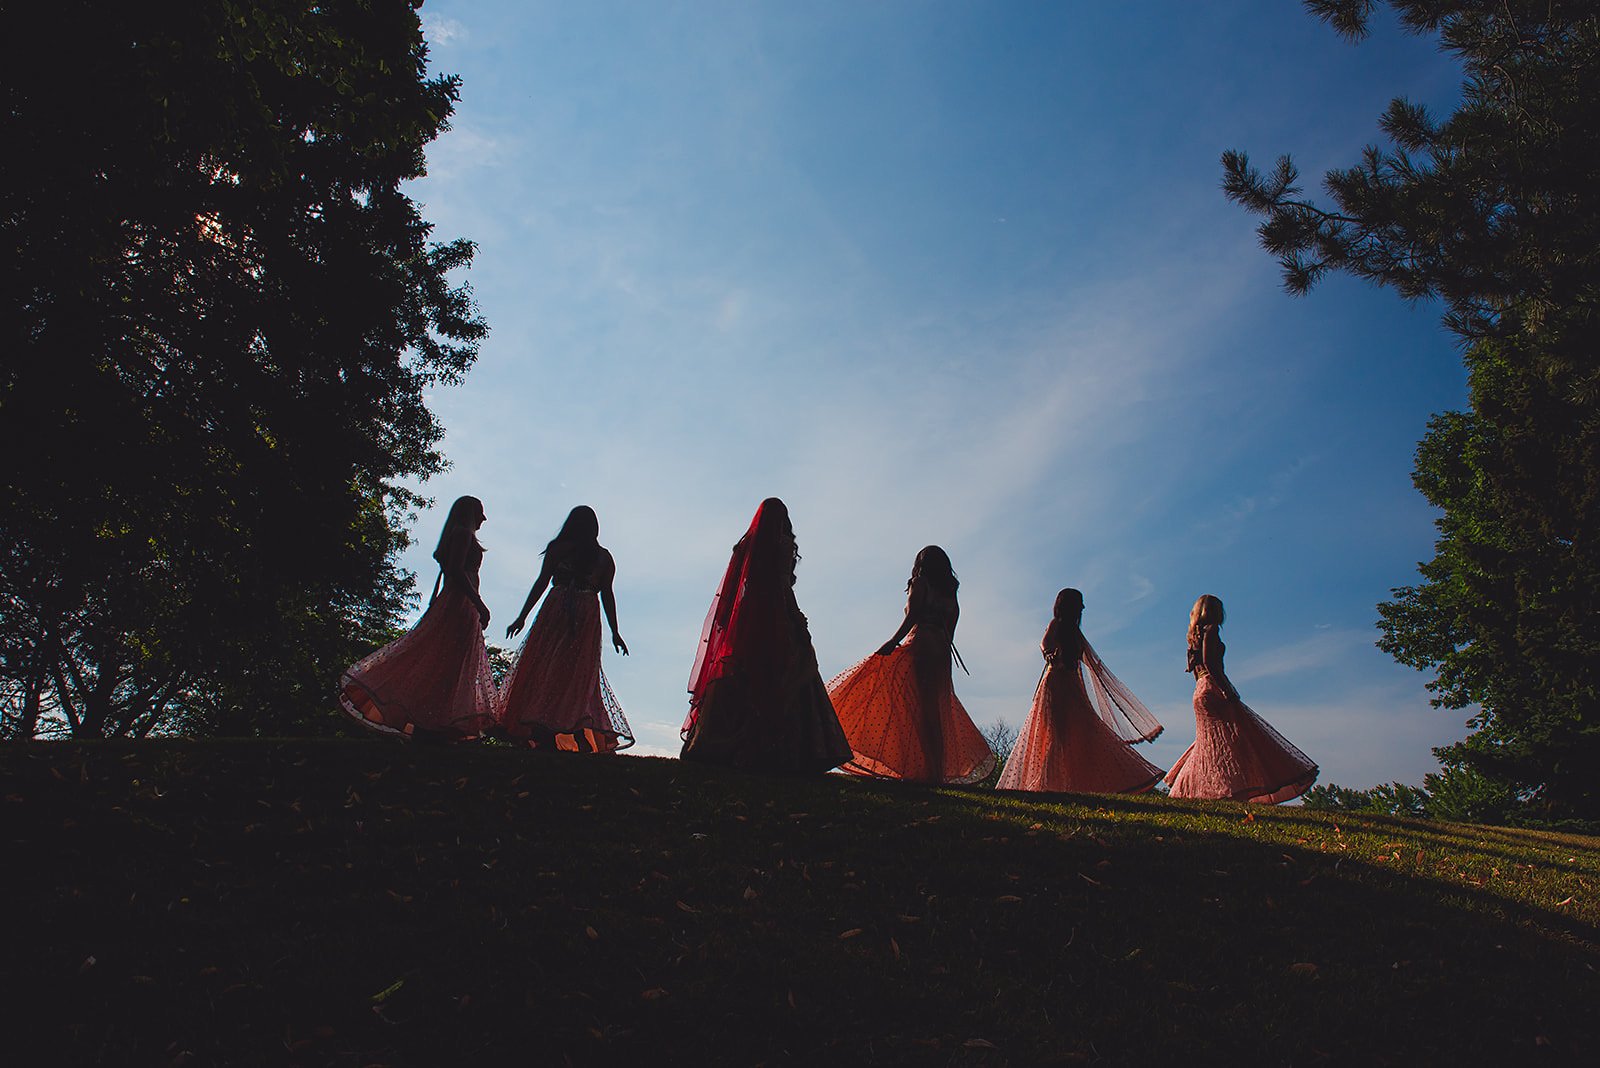  Indian Bridal Party, South Asian wedding party, silhouettes 